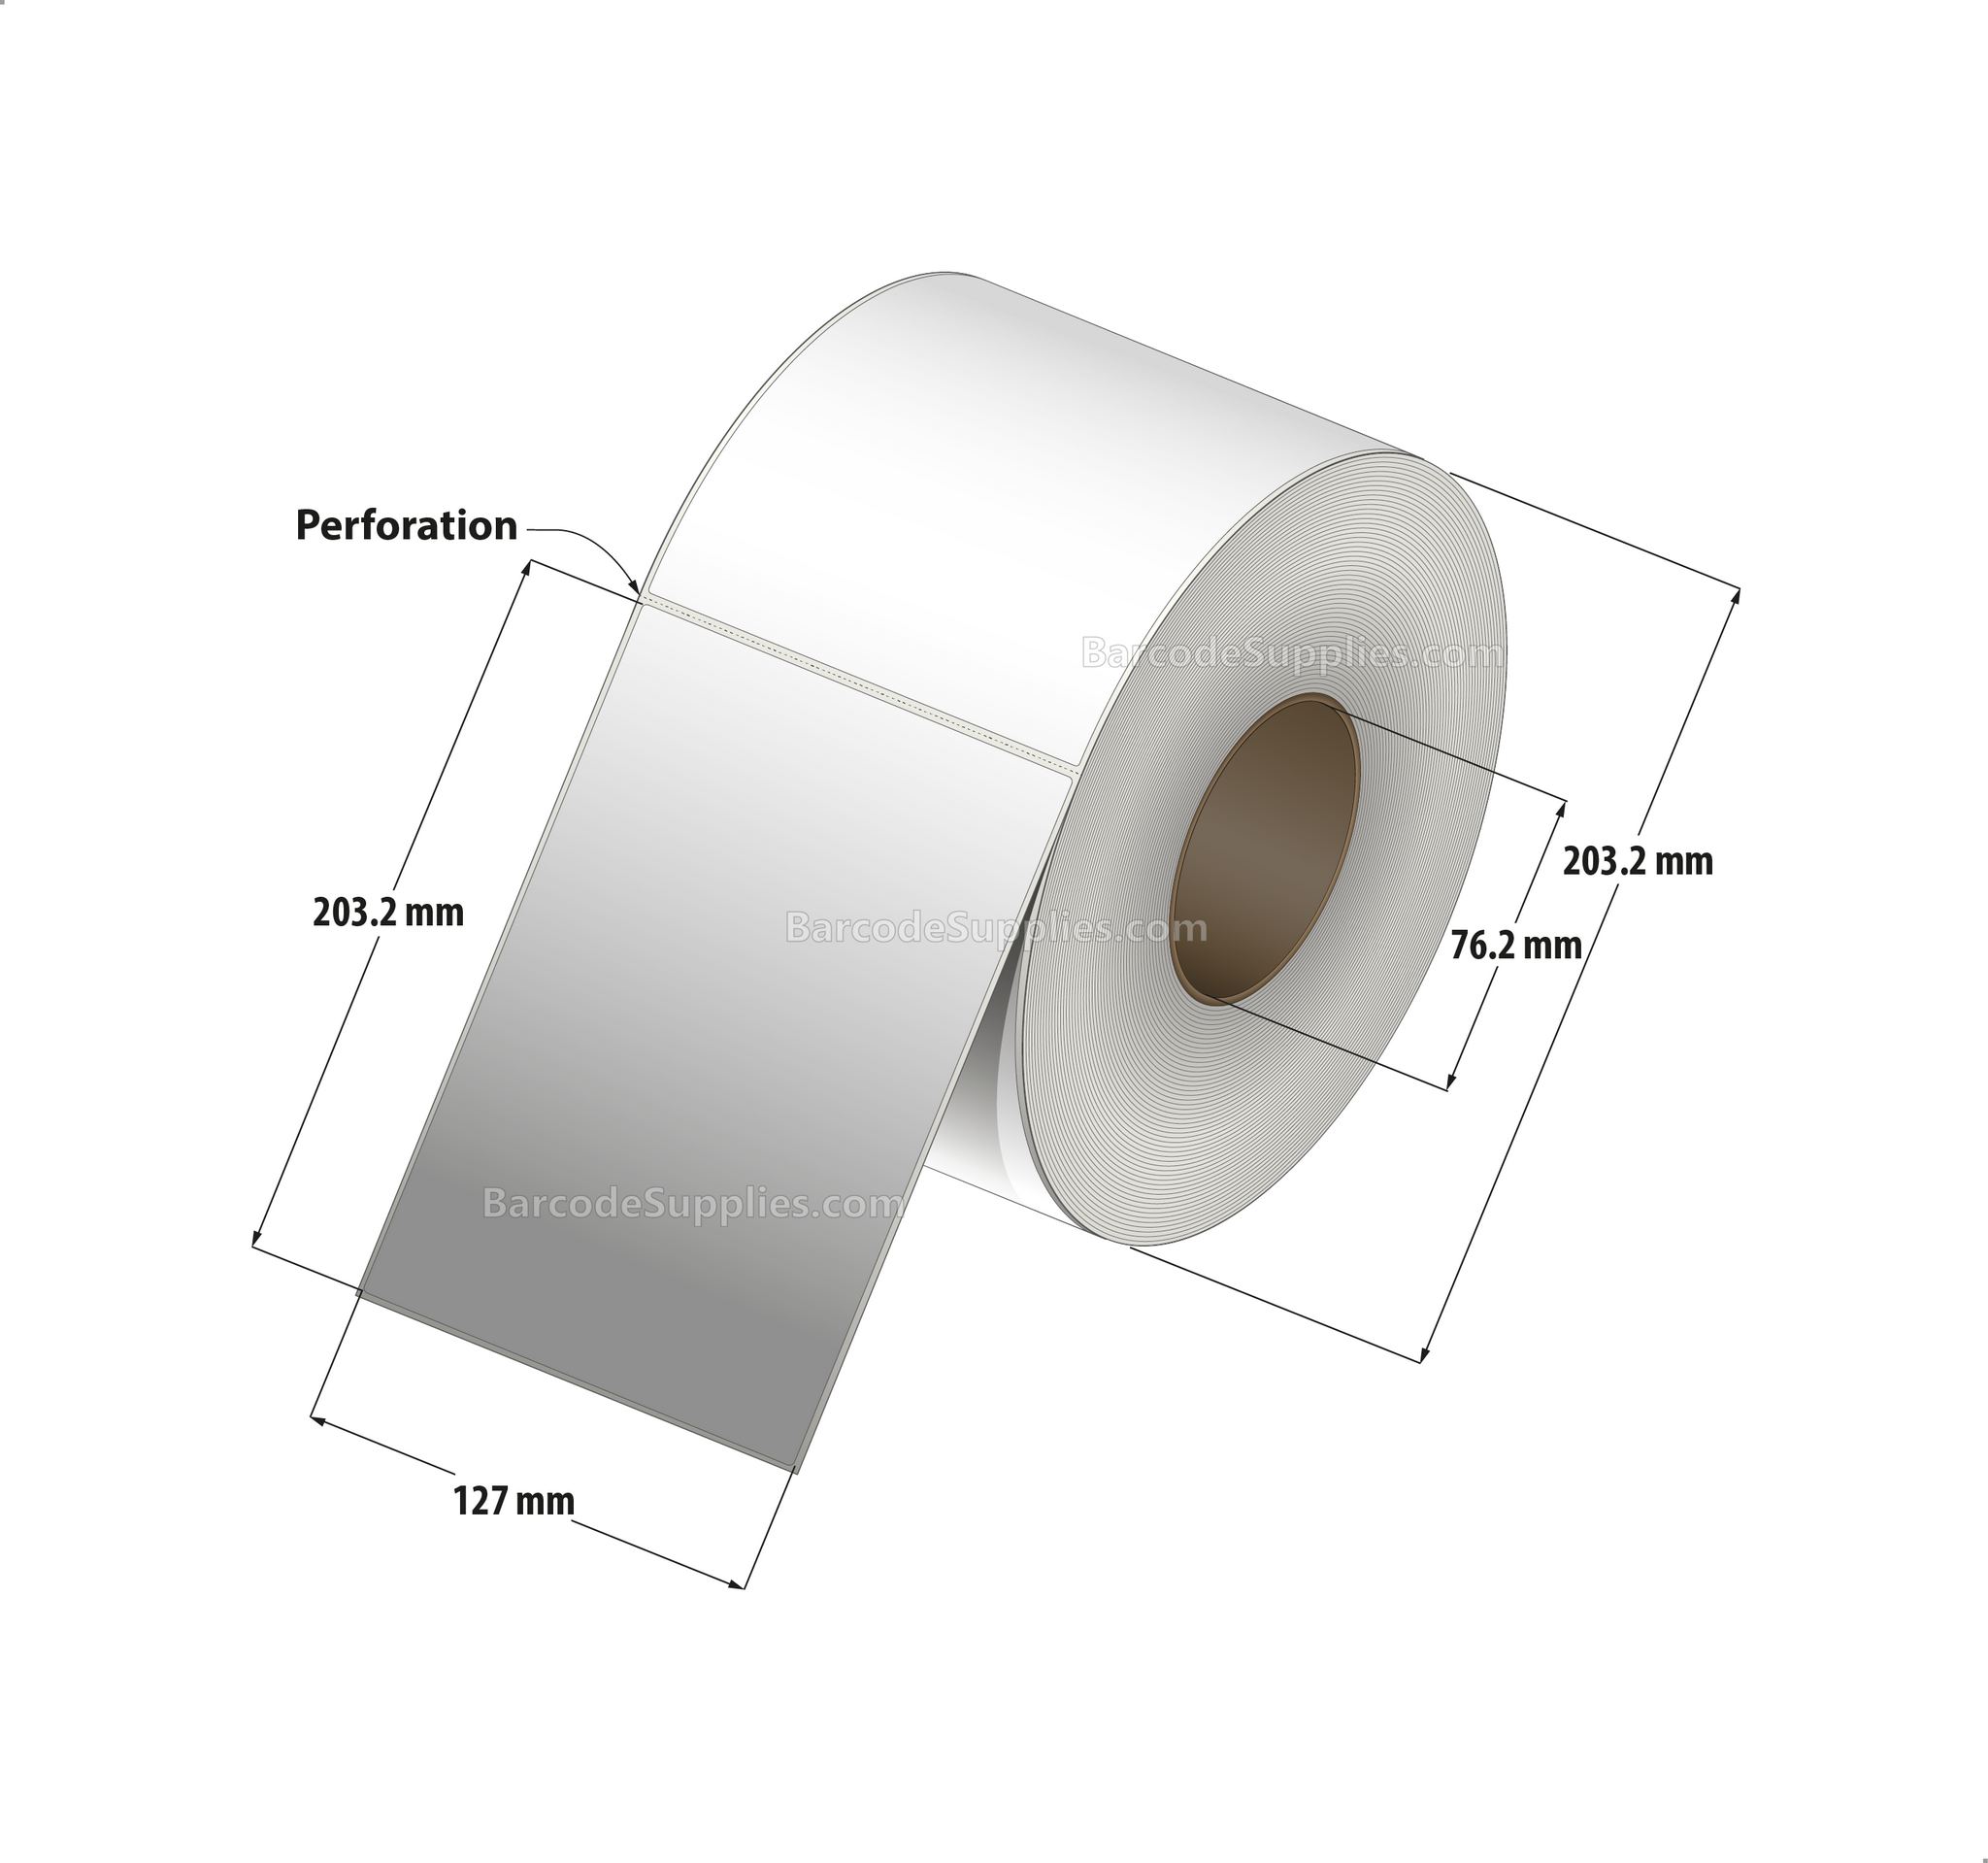 5 x 3 Thermal Transfer White Labels With Permanent Acrylic Adhesive - Not Perforated - 1900 Labels Per Roll - Carton Of 4 Rolls - 7600 Labels Total - MPN: TH53-1